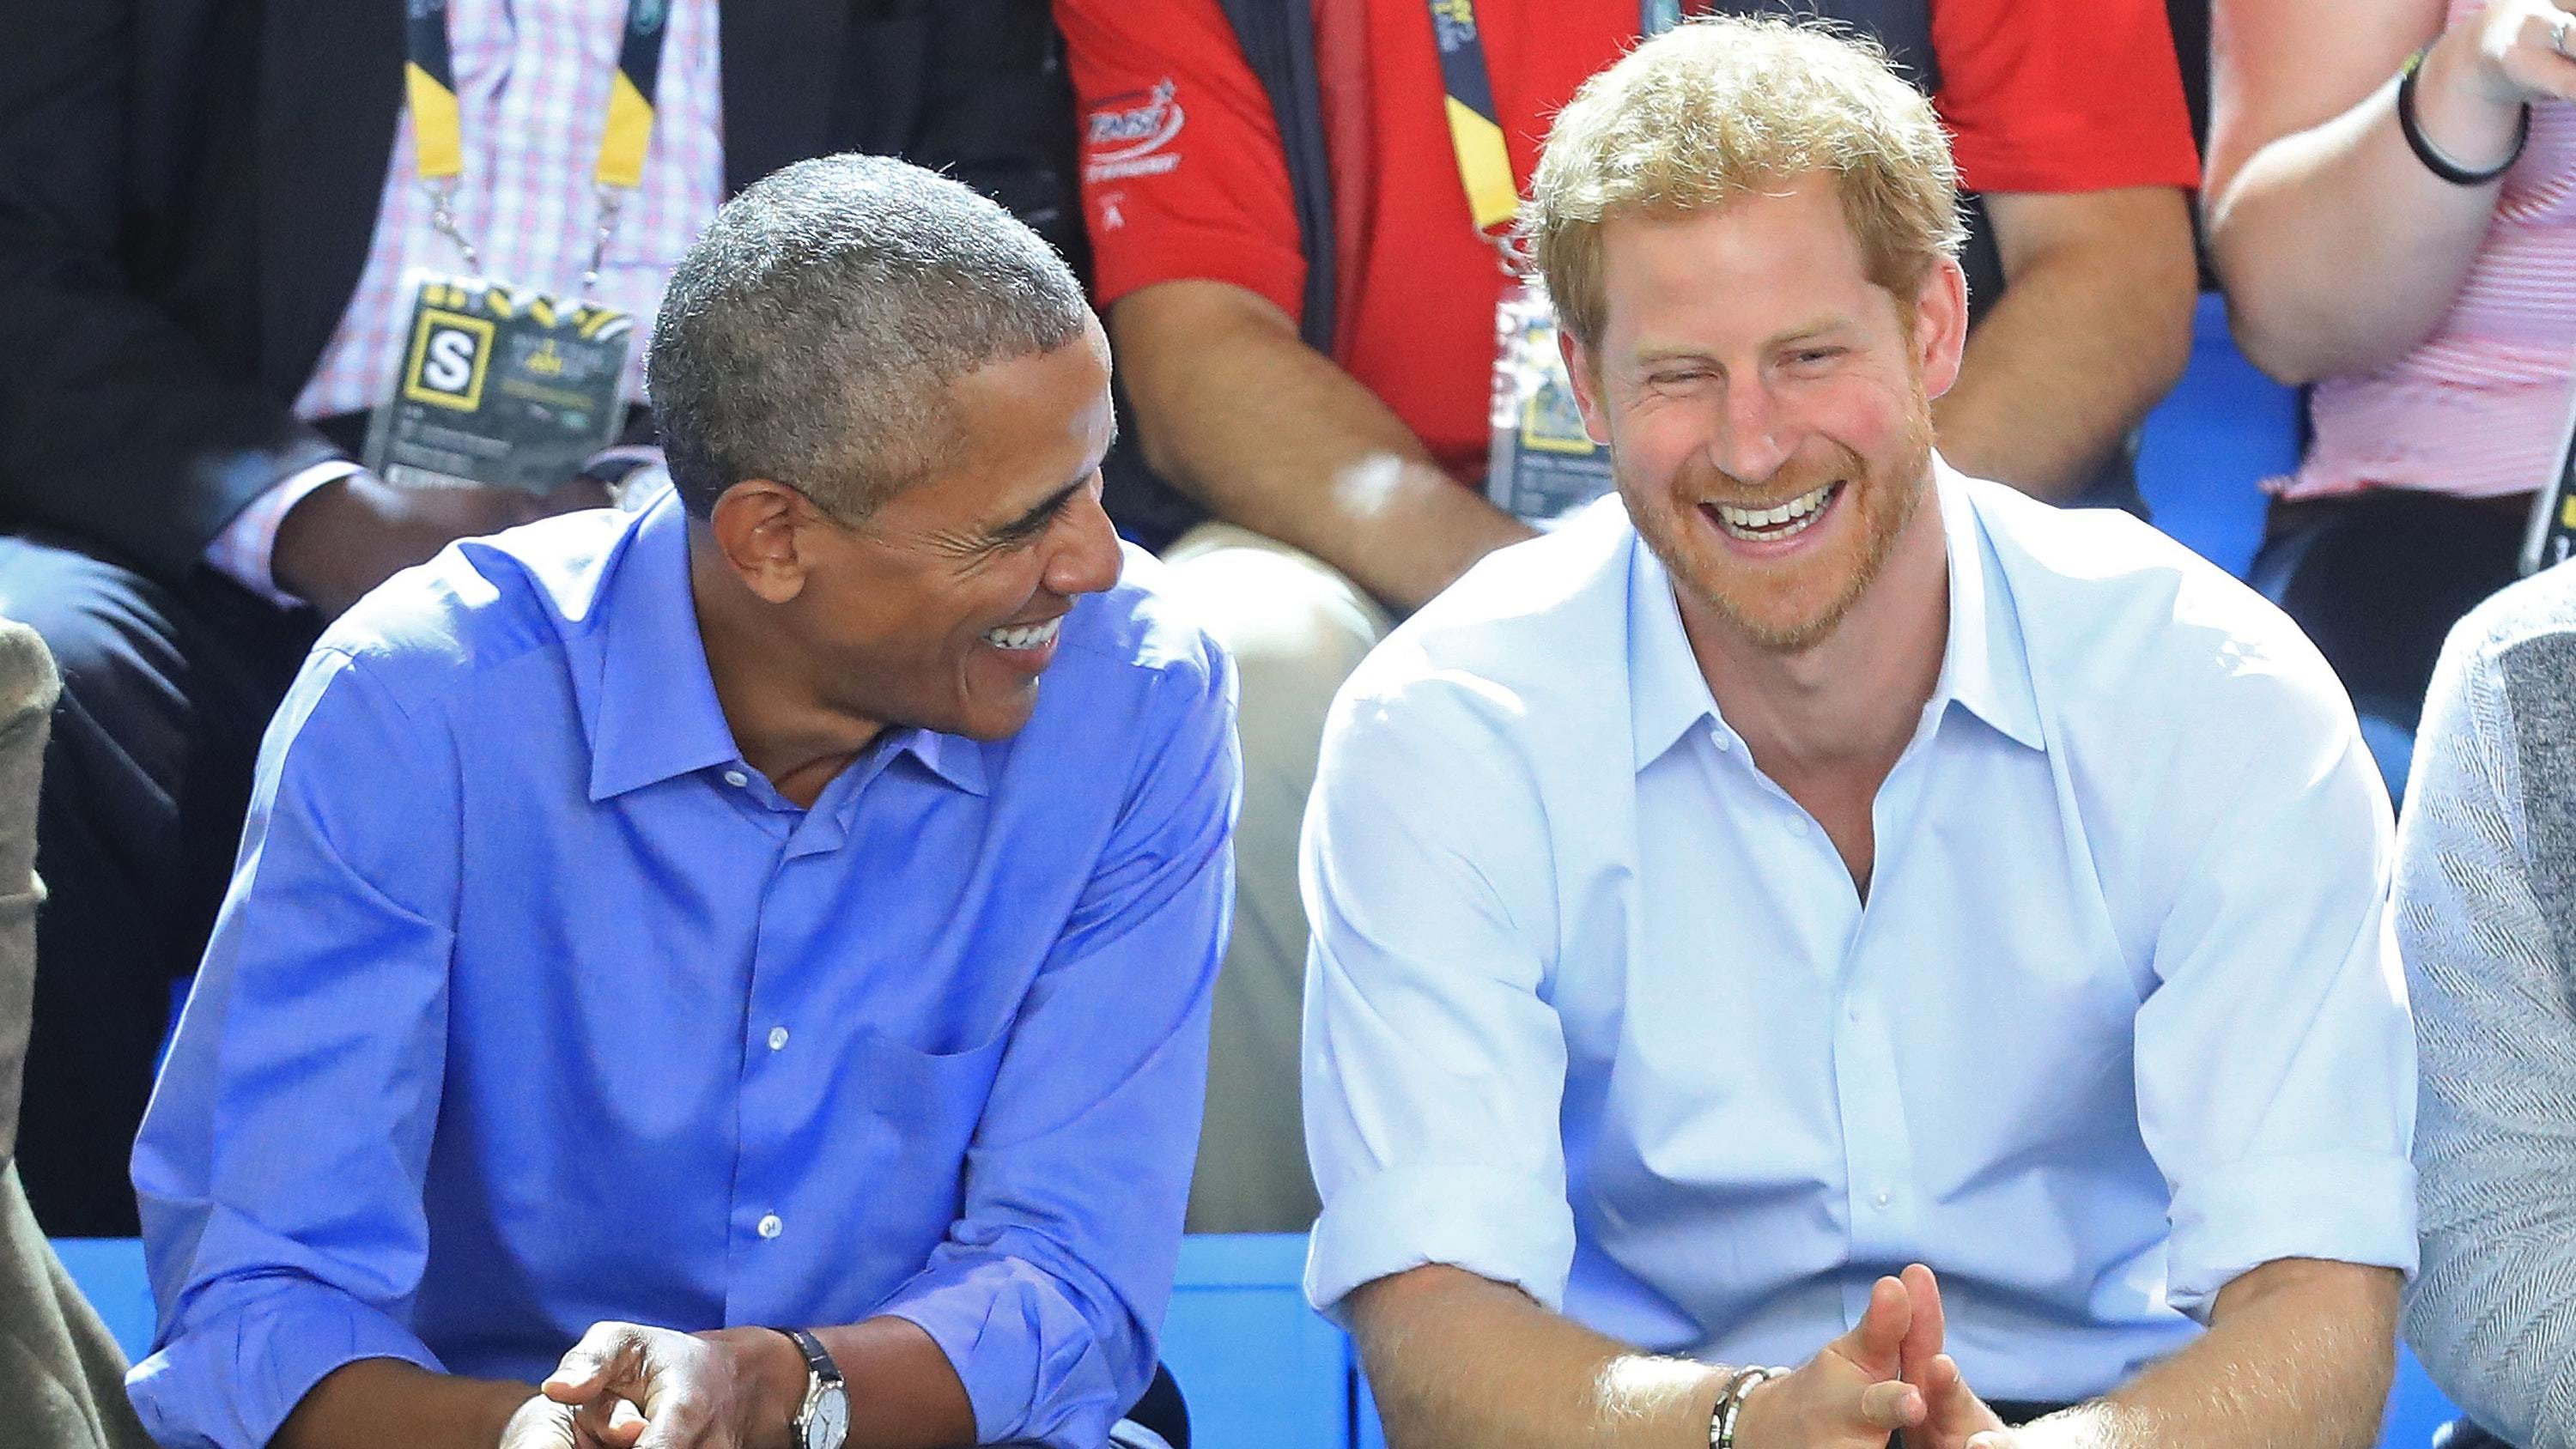 Former US president Barack Obama and Prince Harry at the Invictus Games (Danny Lawson/PA)